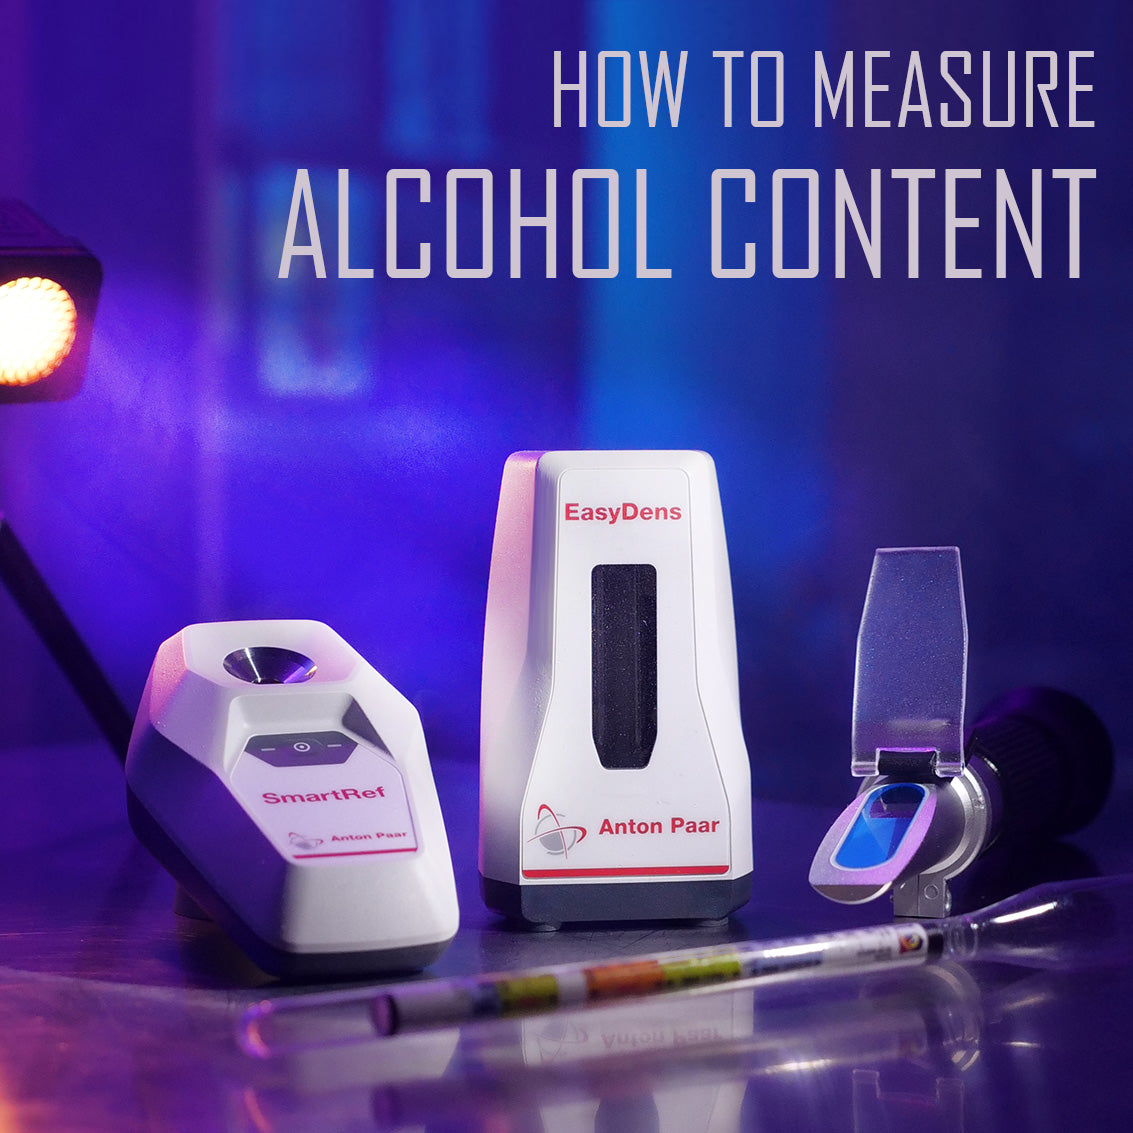 How to Measure Alcohol Content